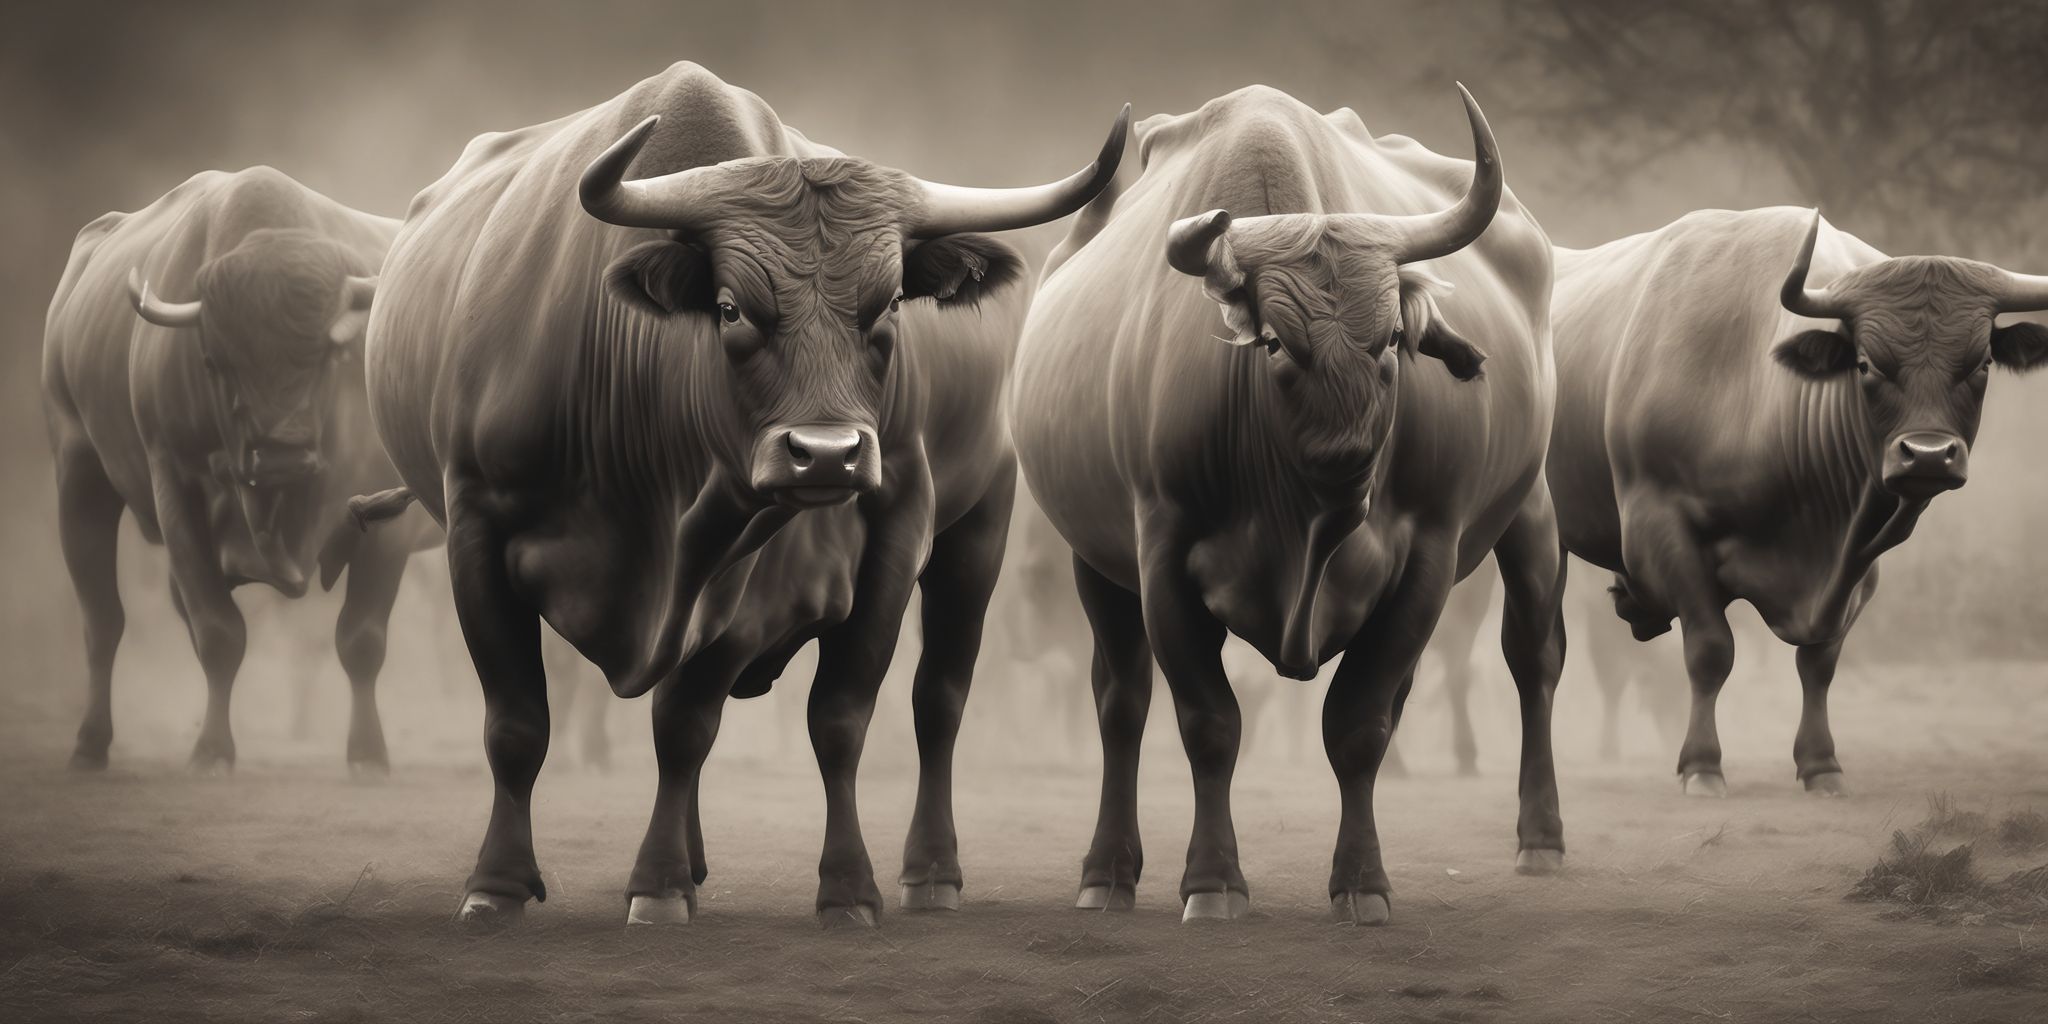 Bulls  in realistic, photographic style